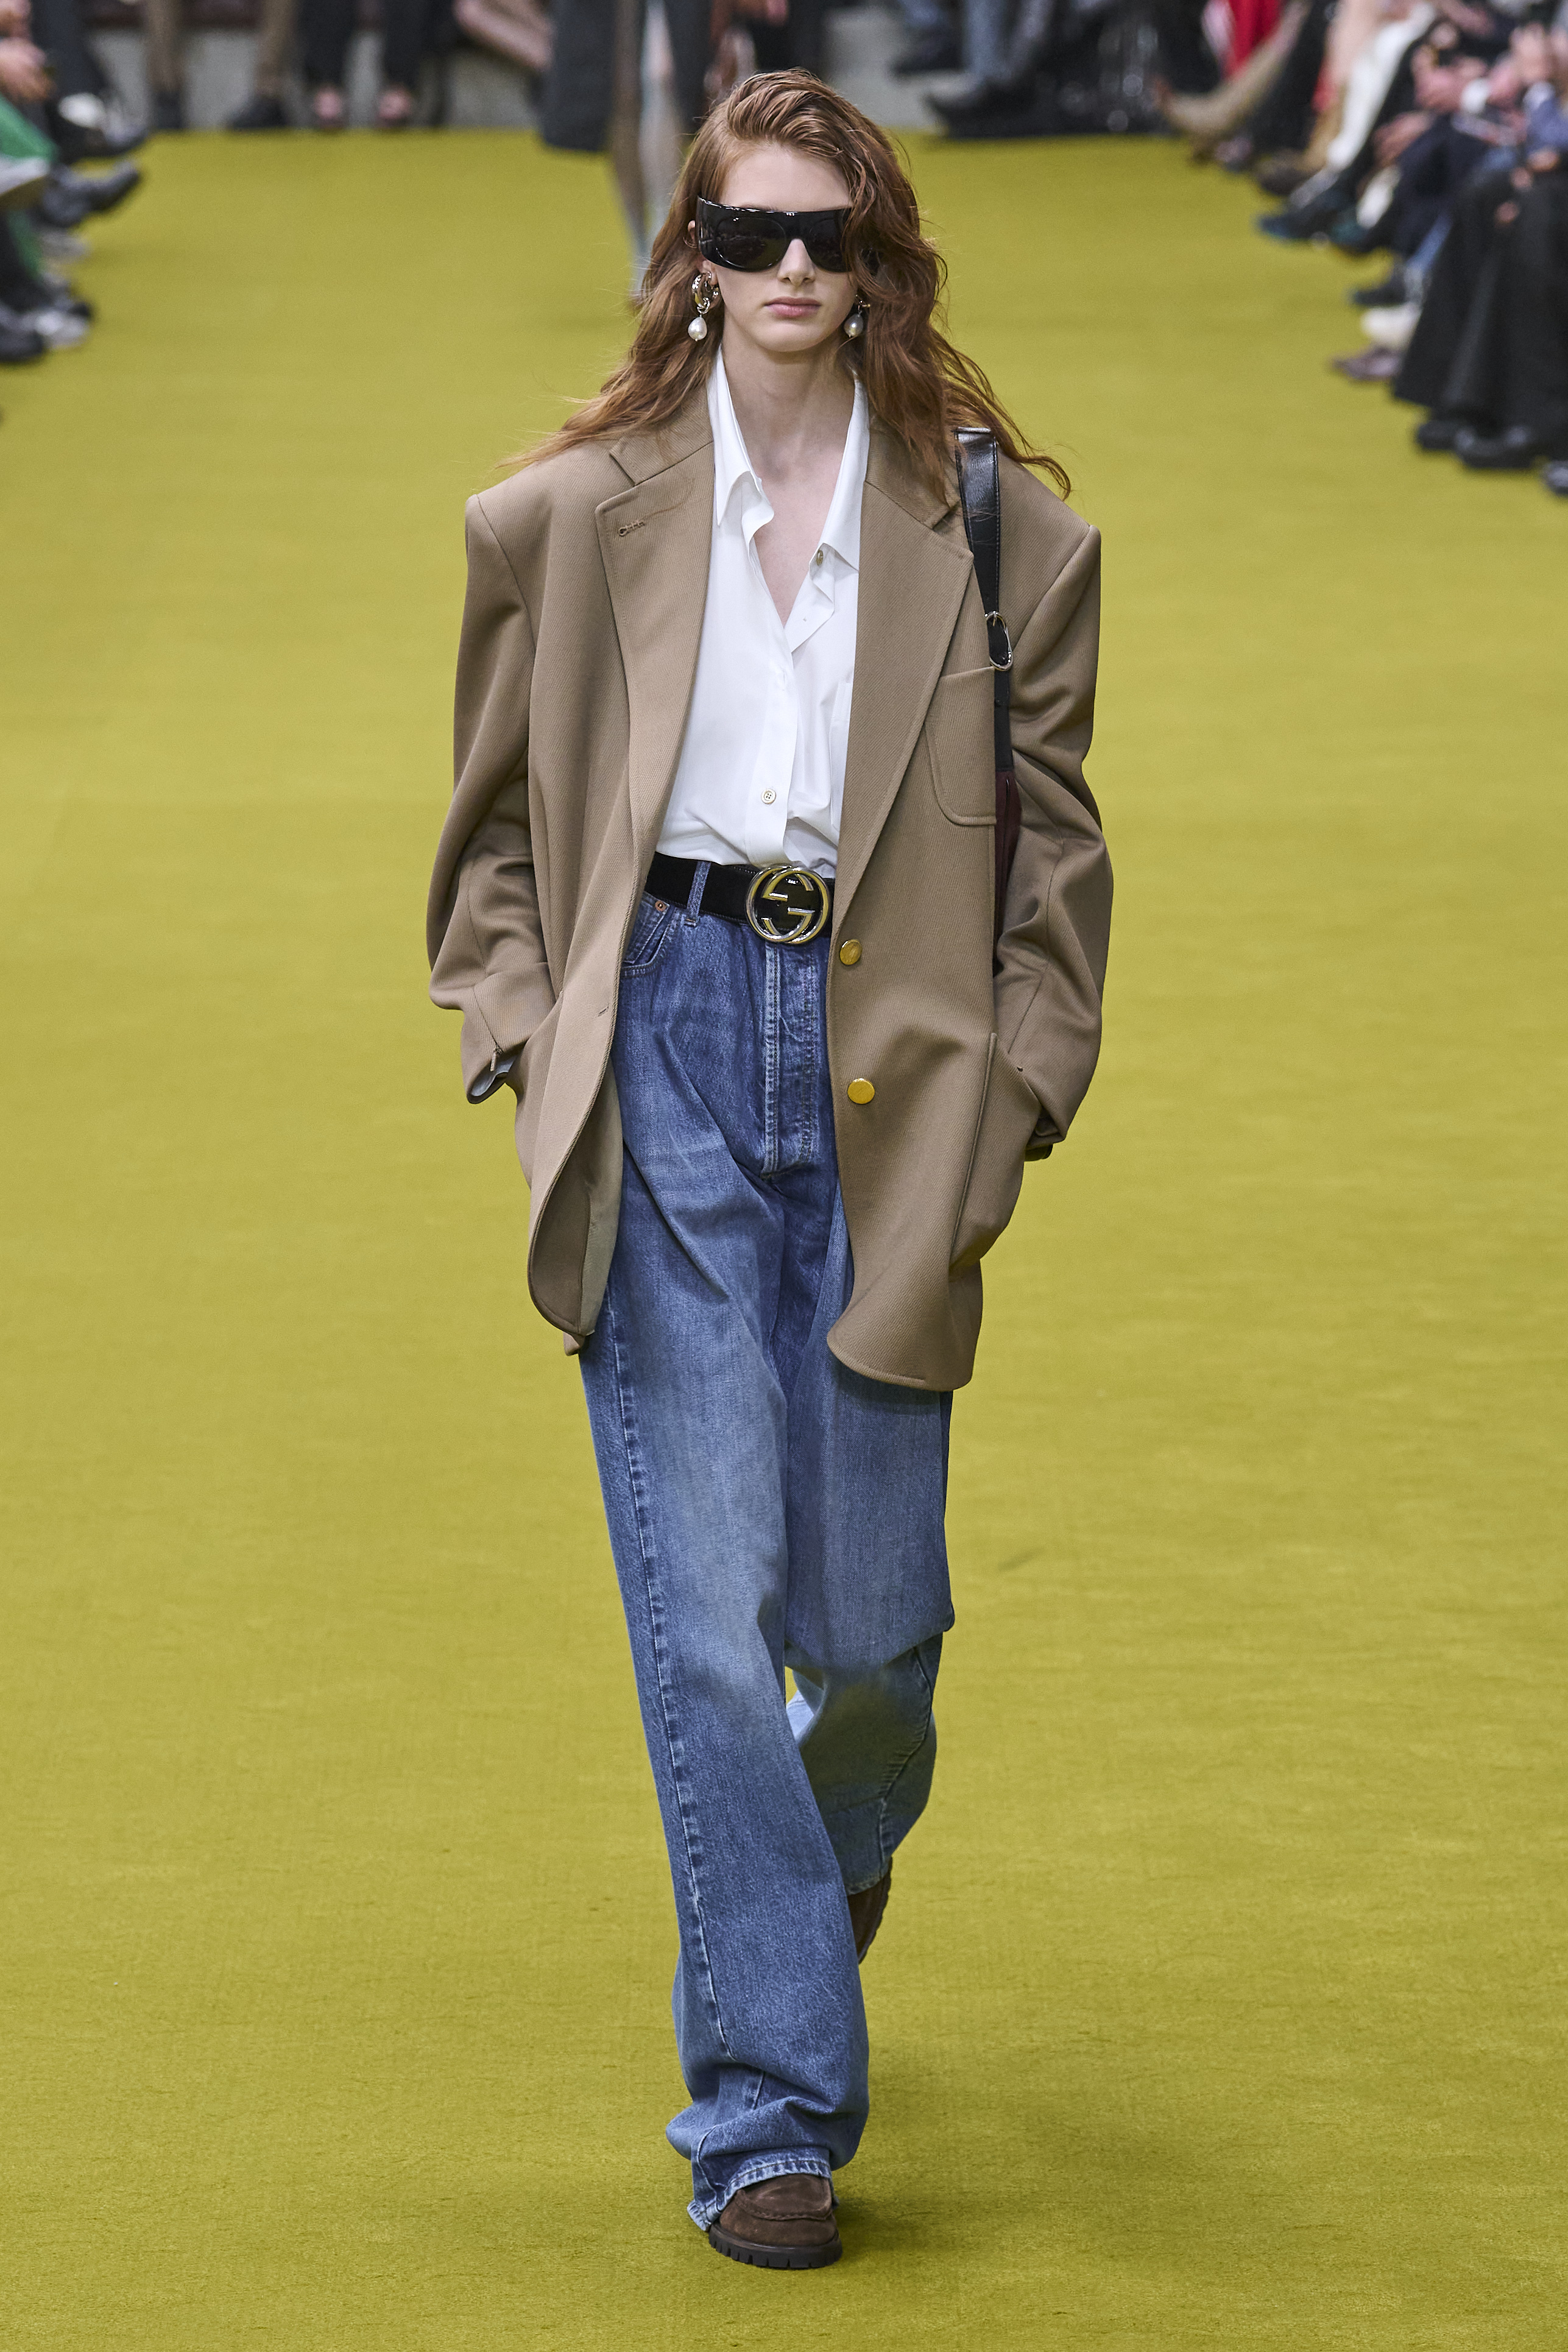 90 Looks From Gucci Fall 2018 MFW Show – Gucci Runway at London